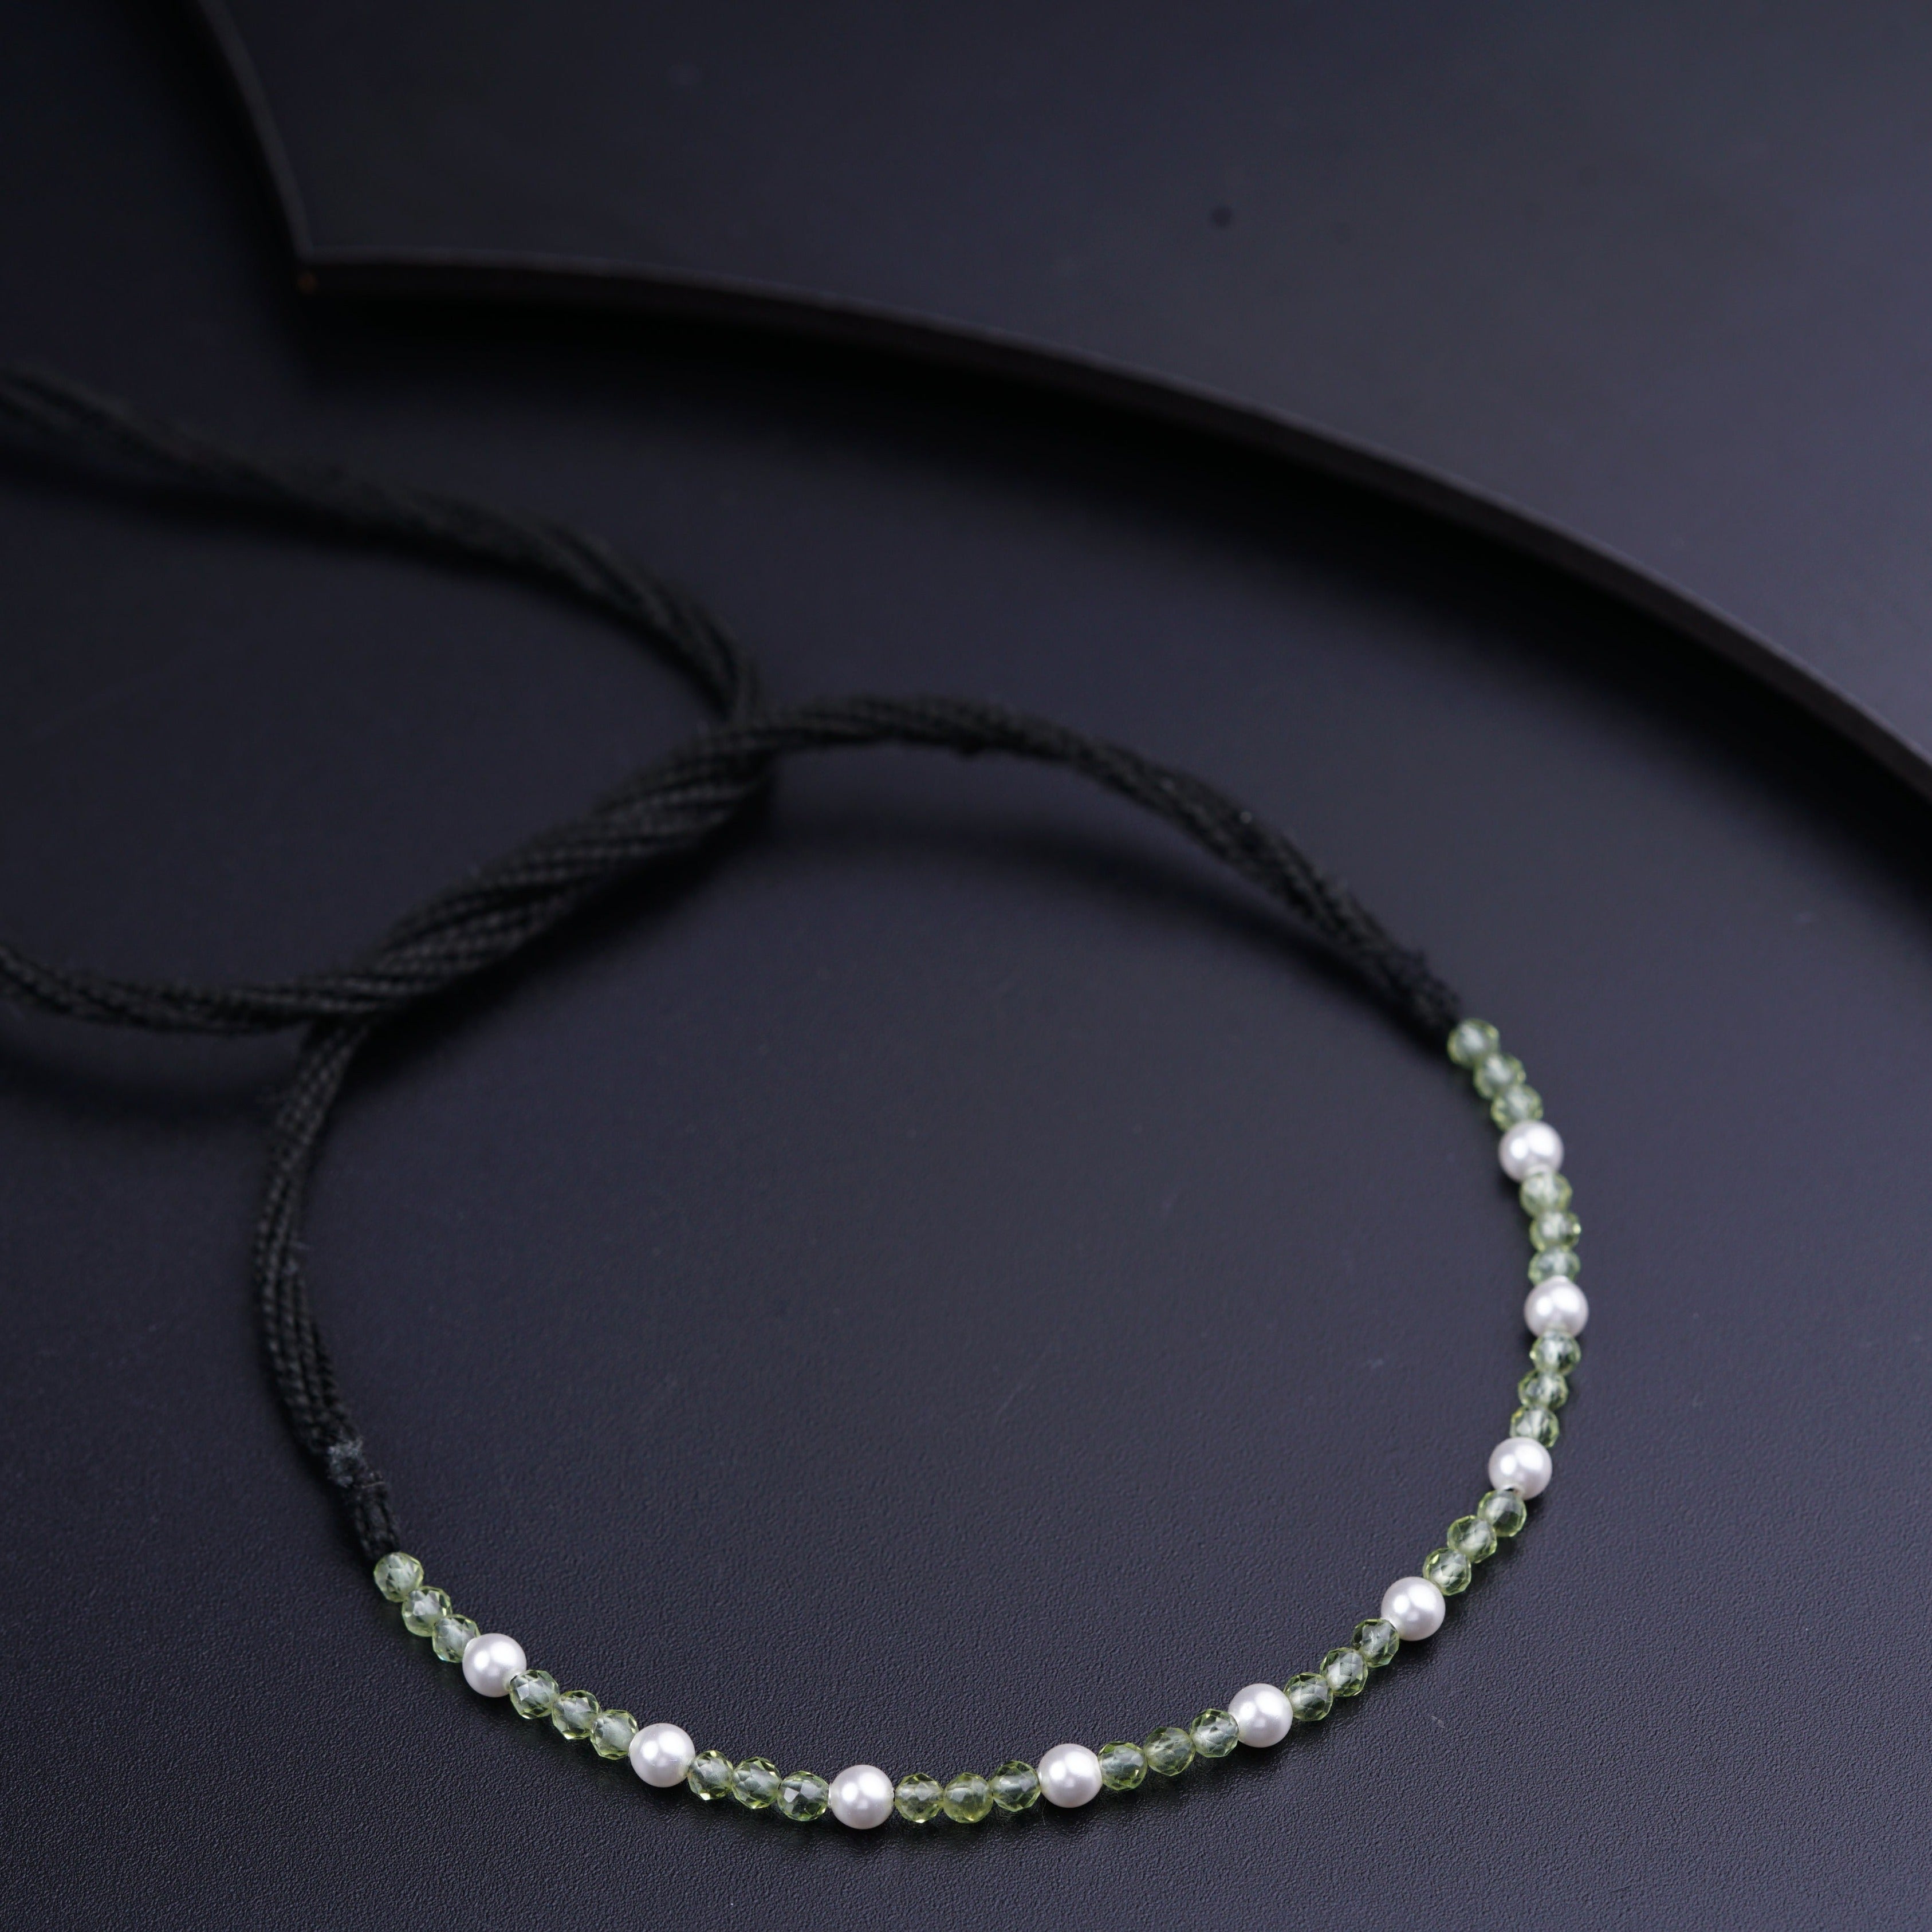 a green and white beaded necklace on a black surface